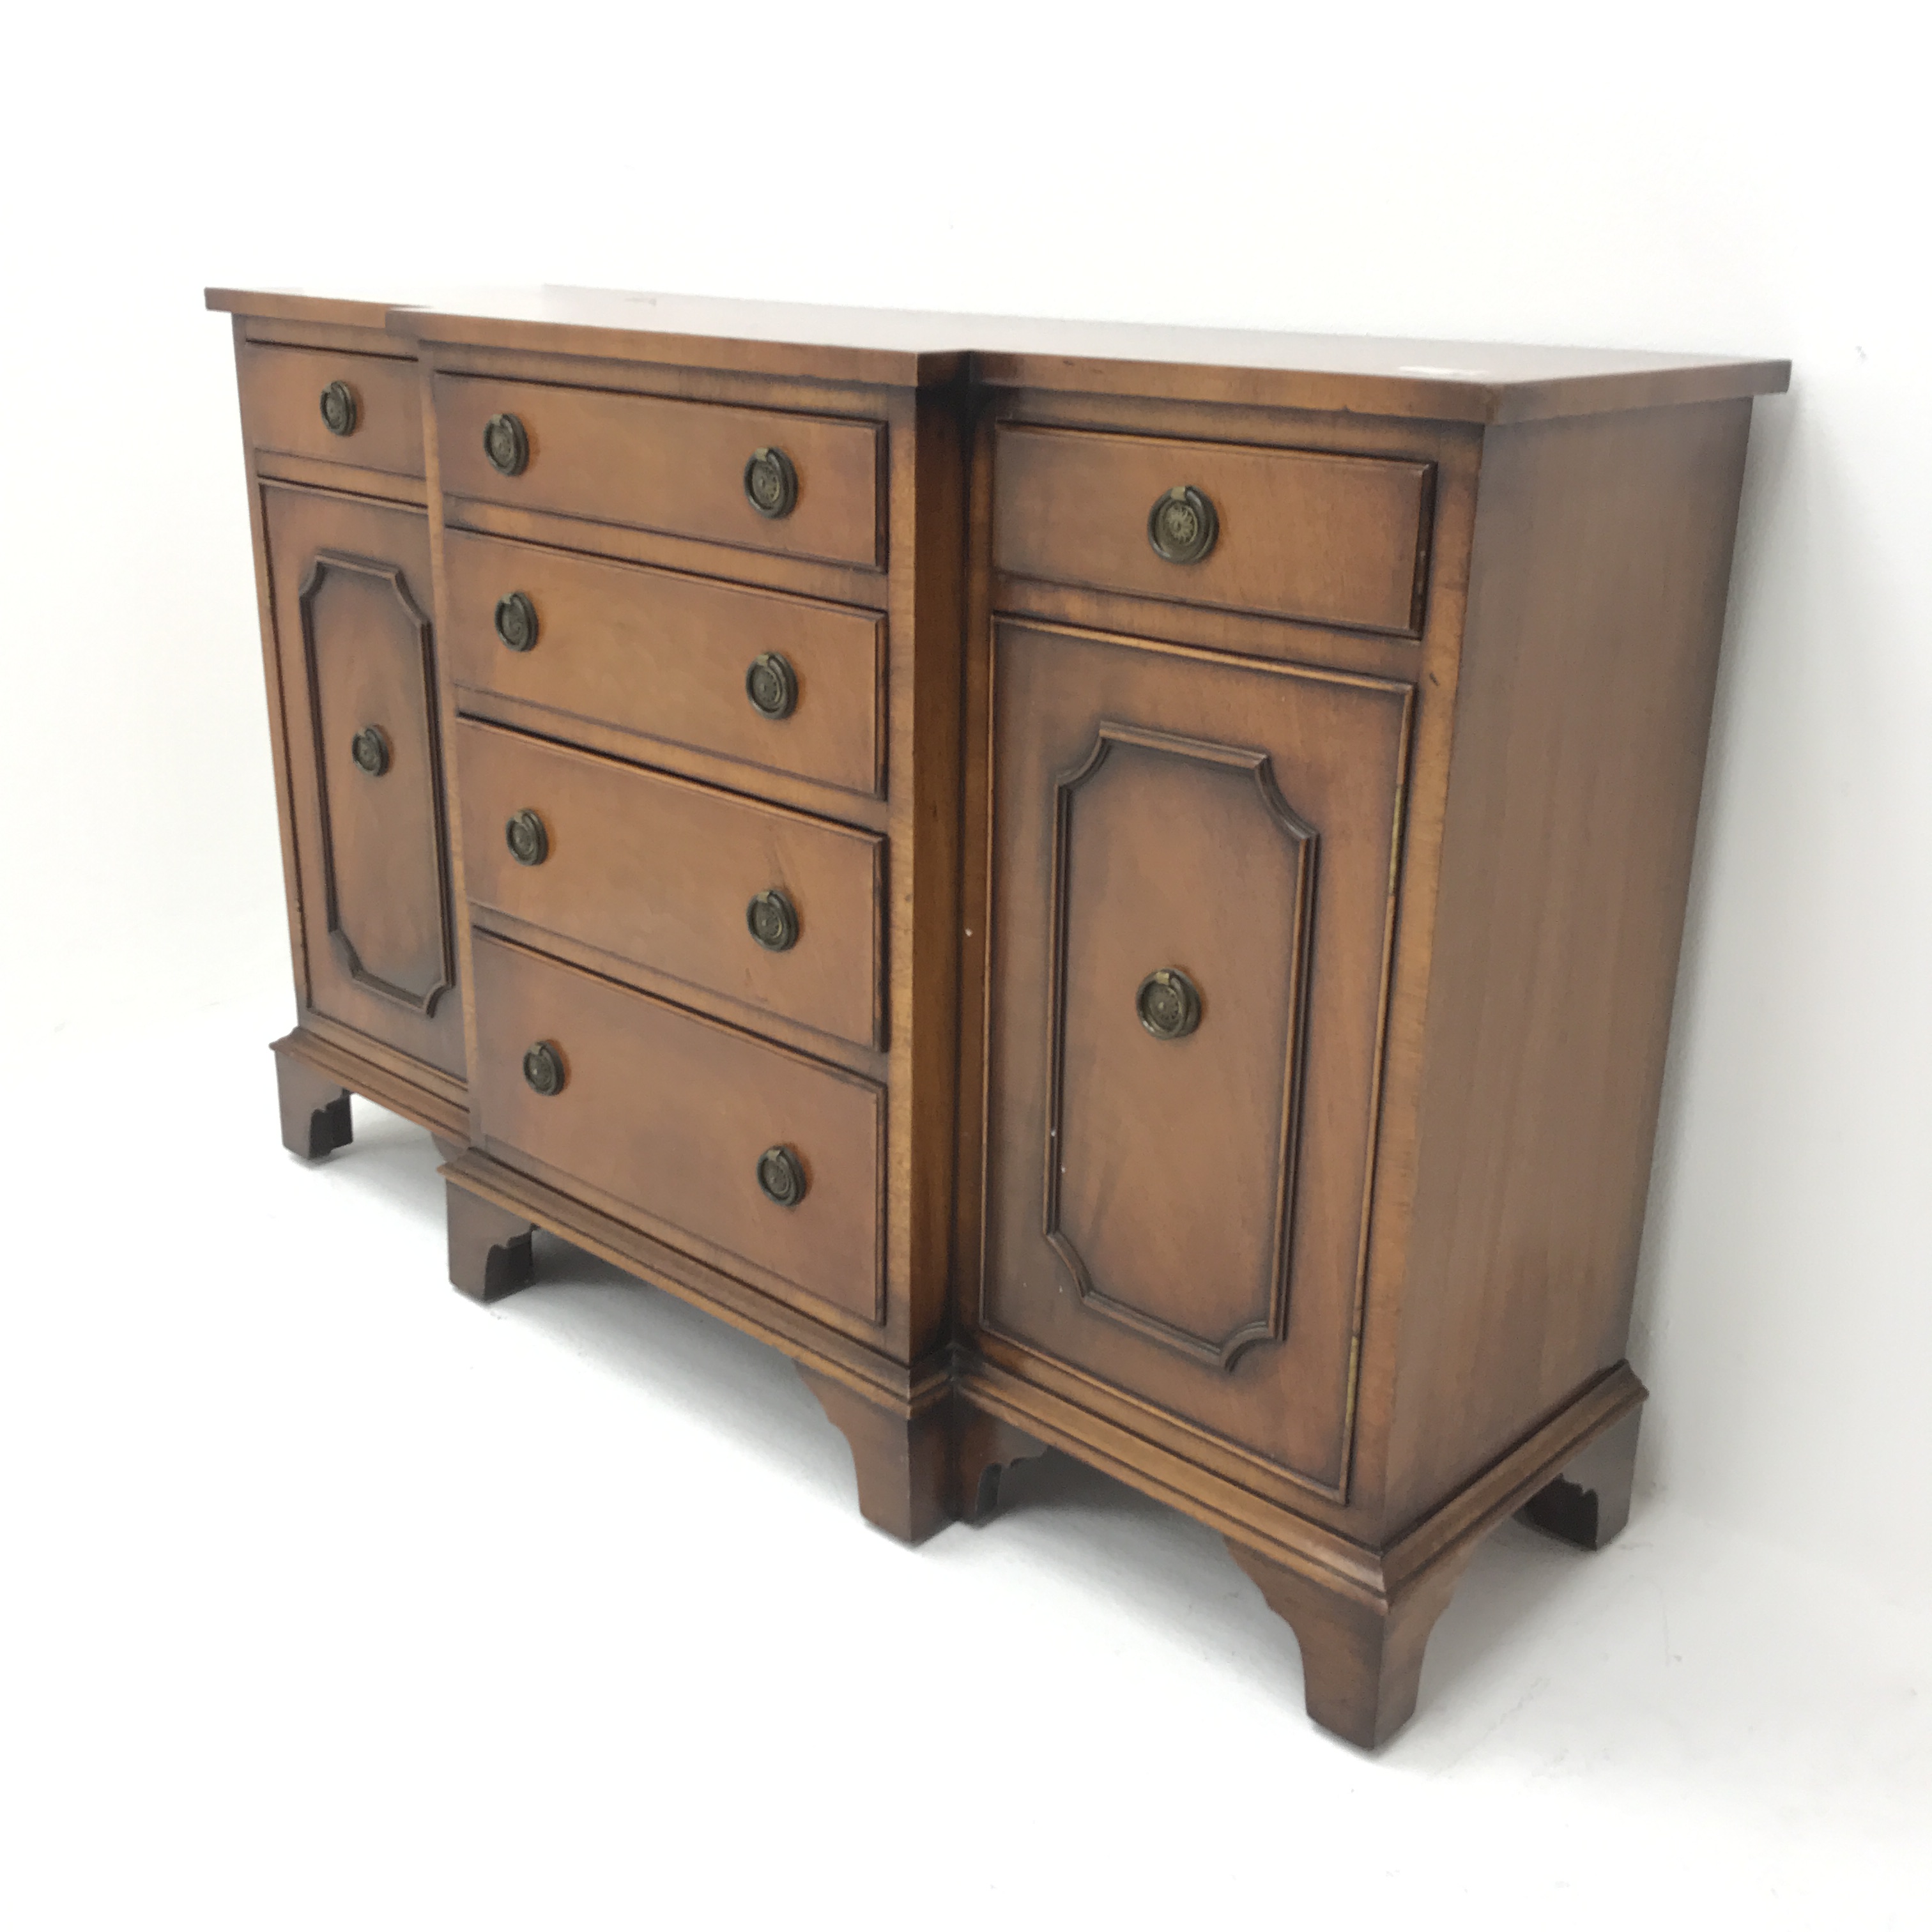 Bevan Funnell Reprodux small cross banded mahogany breakfront sideboard, six drawers, two cupboards,